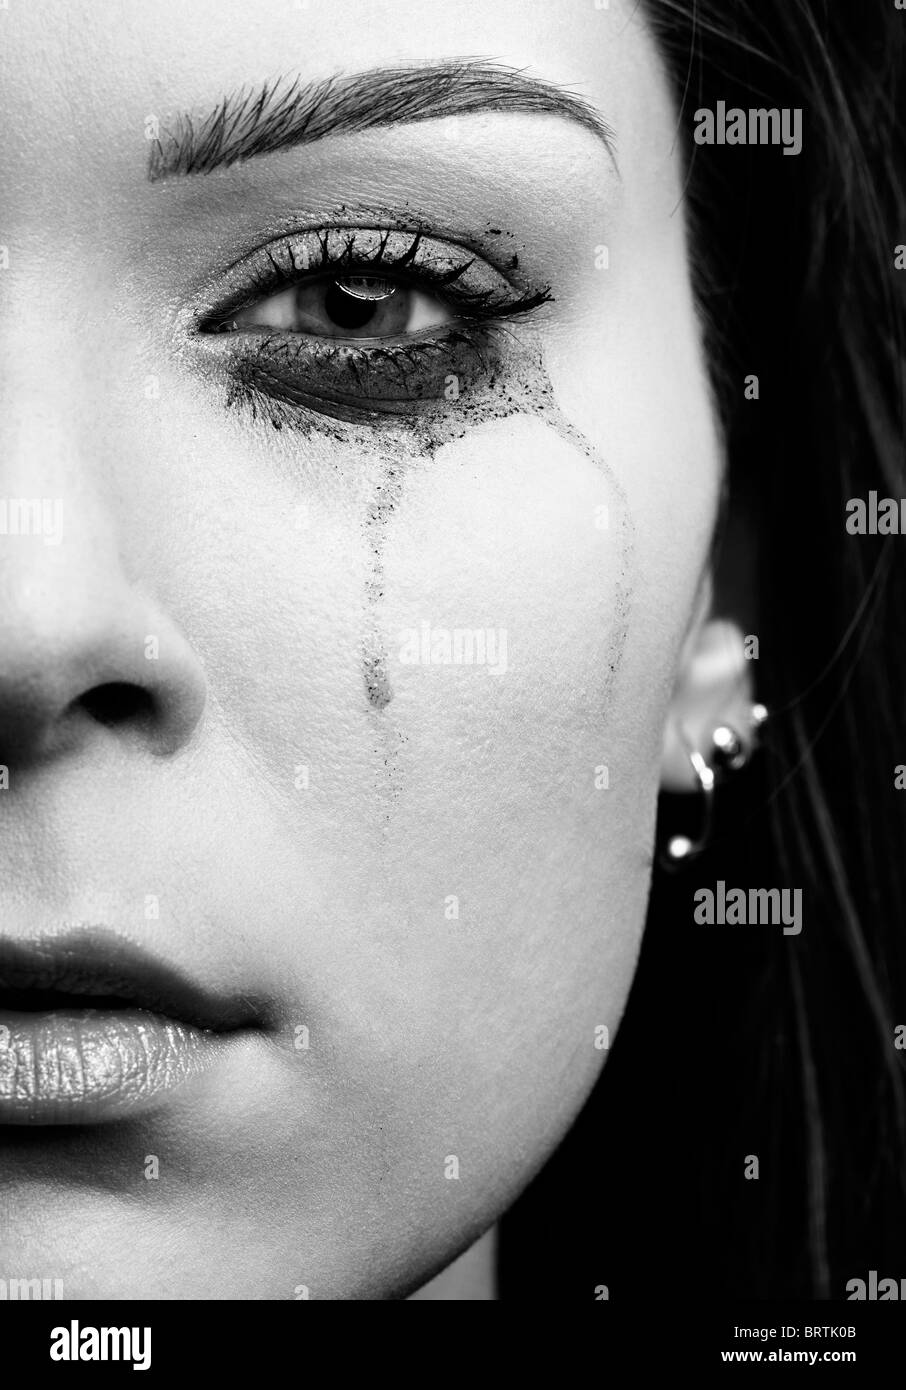 close-up portrait of beautiful crying girl with smeared mascara Stock Photo